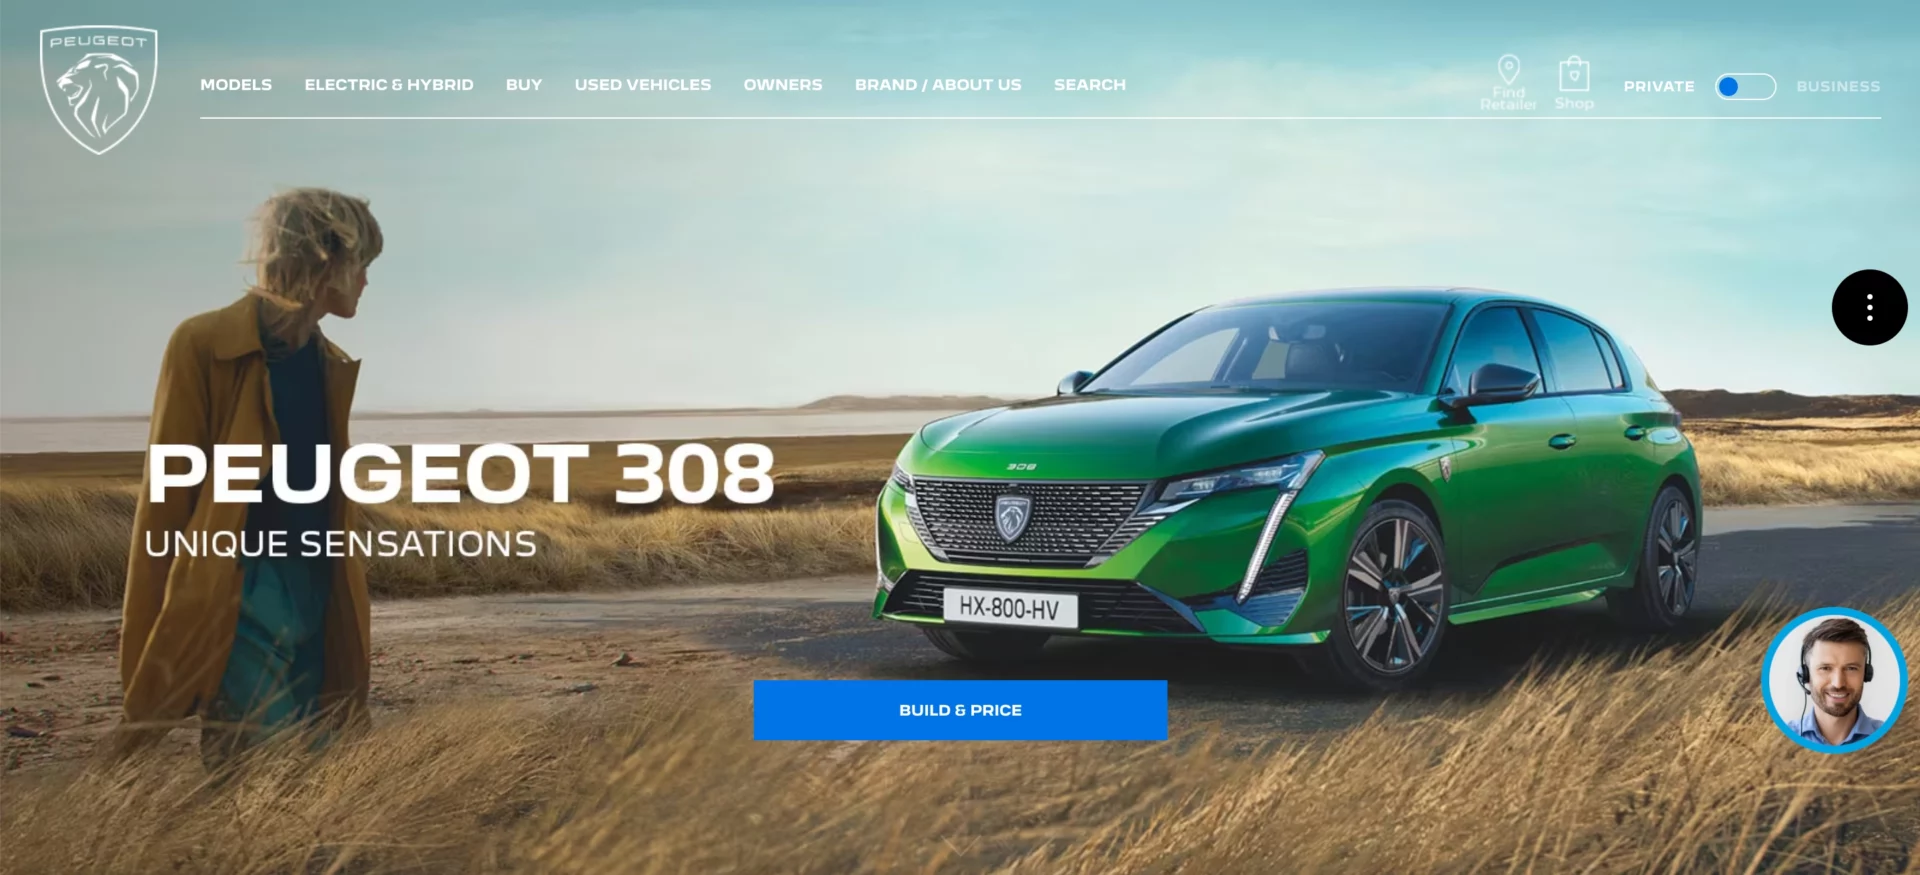 automotive landing page example — alluring image, clear call to action and the discrete navigation bar